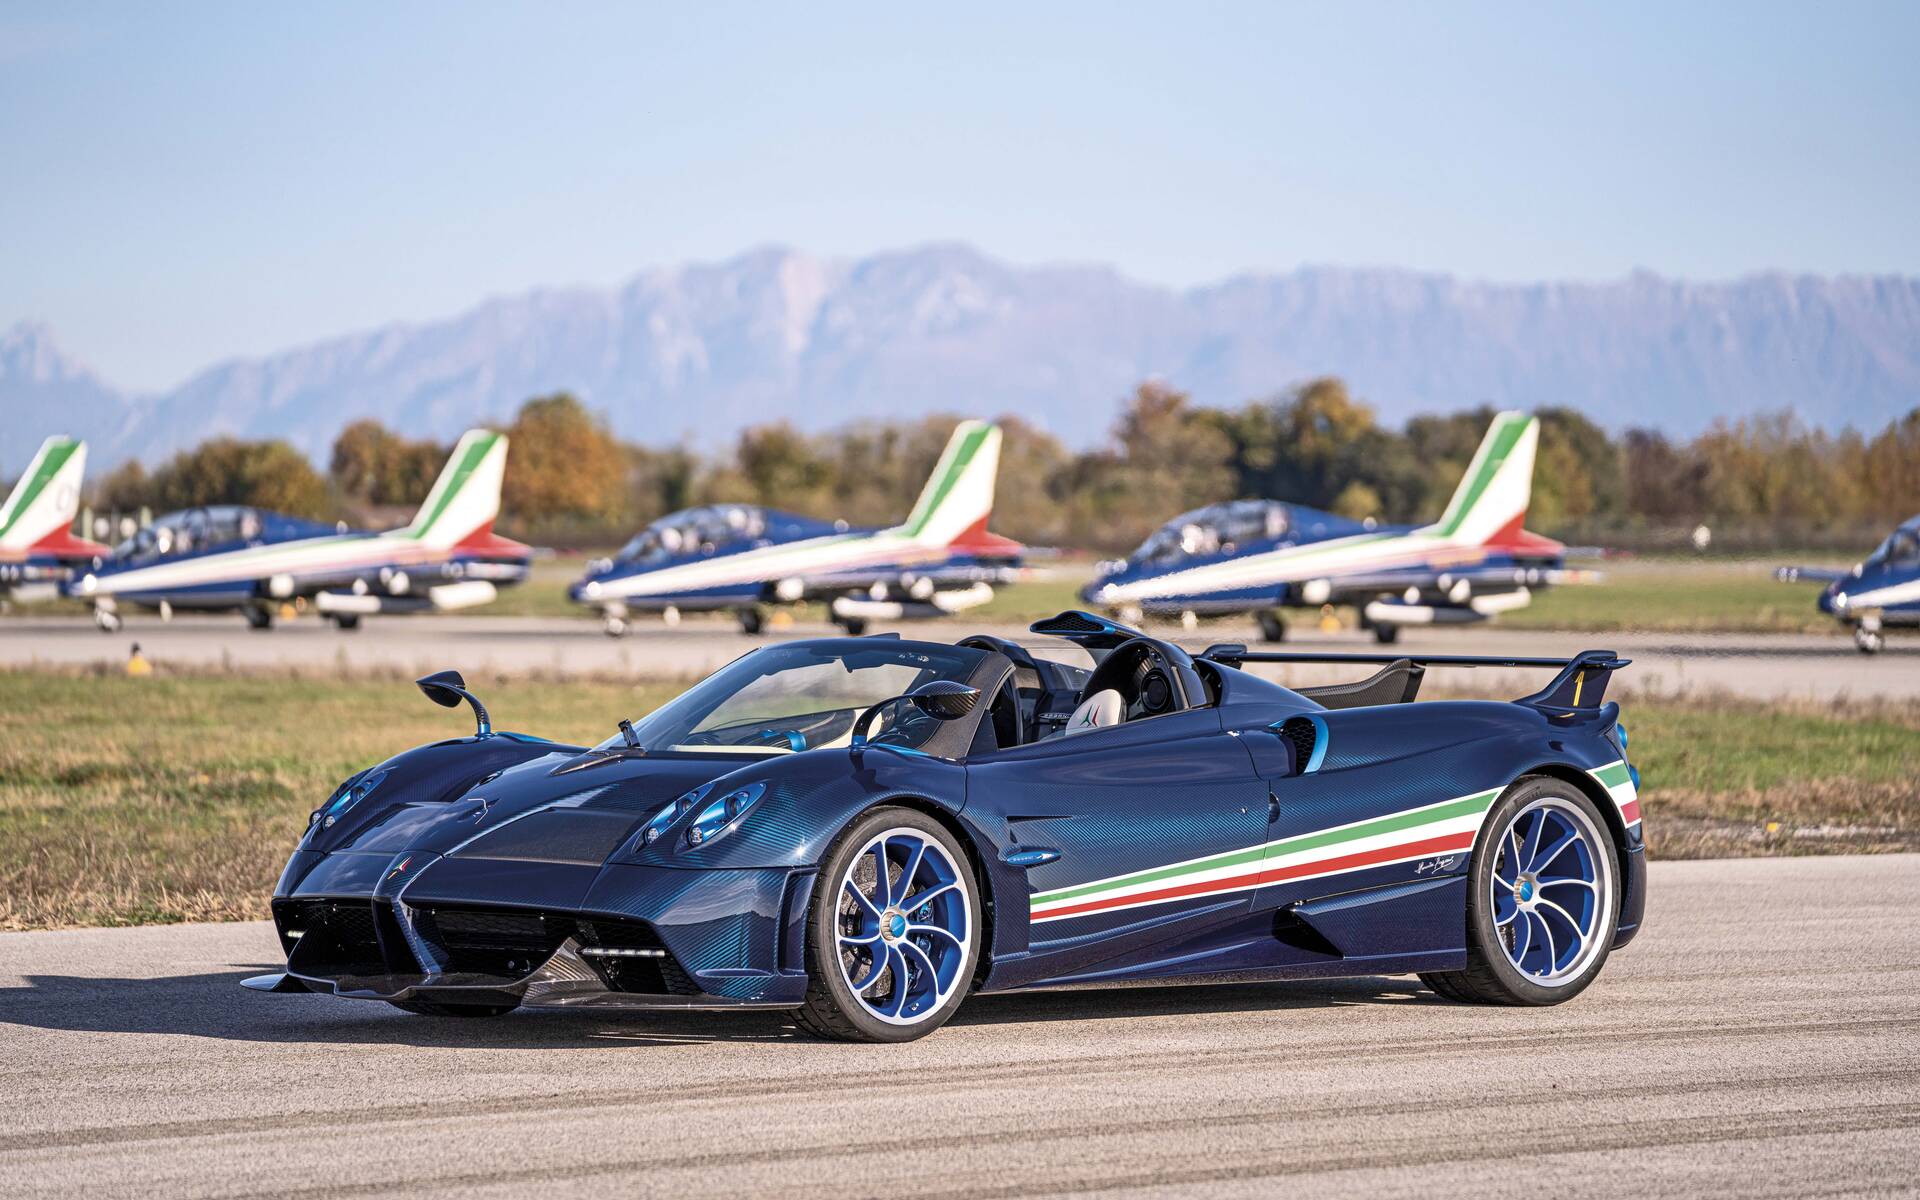 Pagani Huayra Tricolore: 829 Horsepower for $8.6 Million - The Car Guide